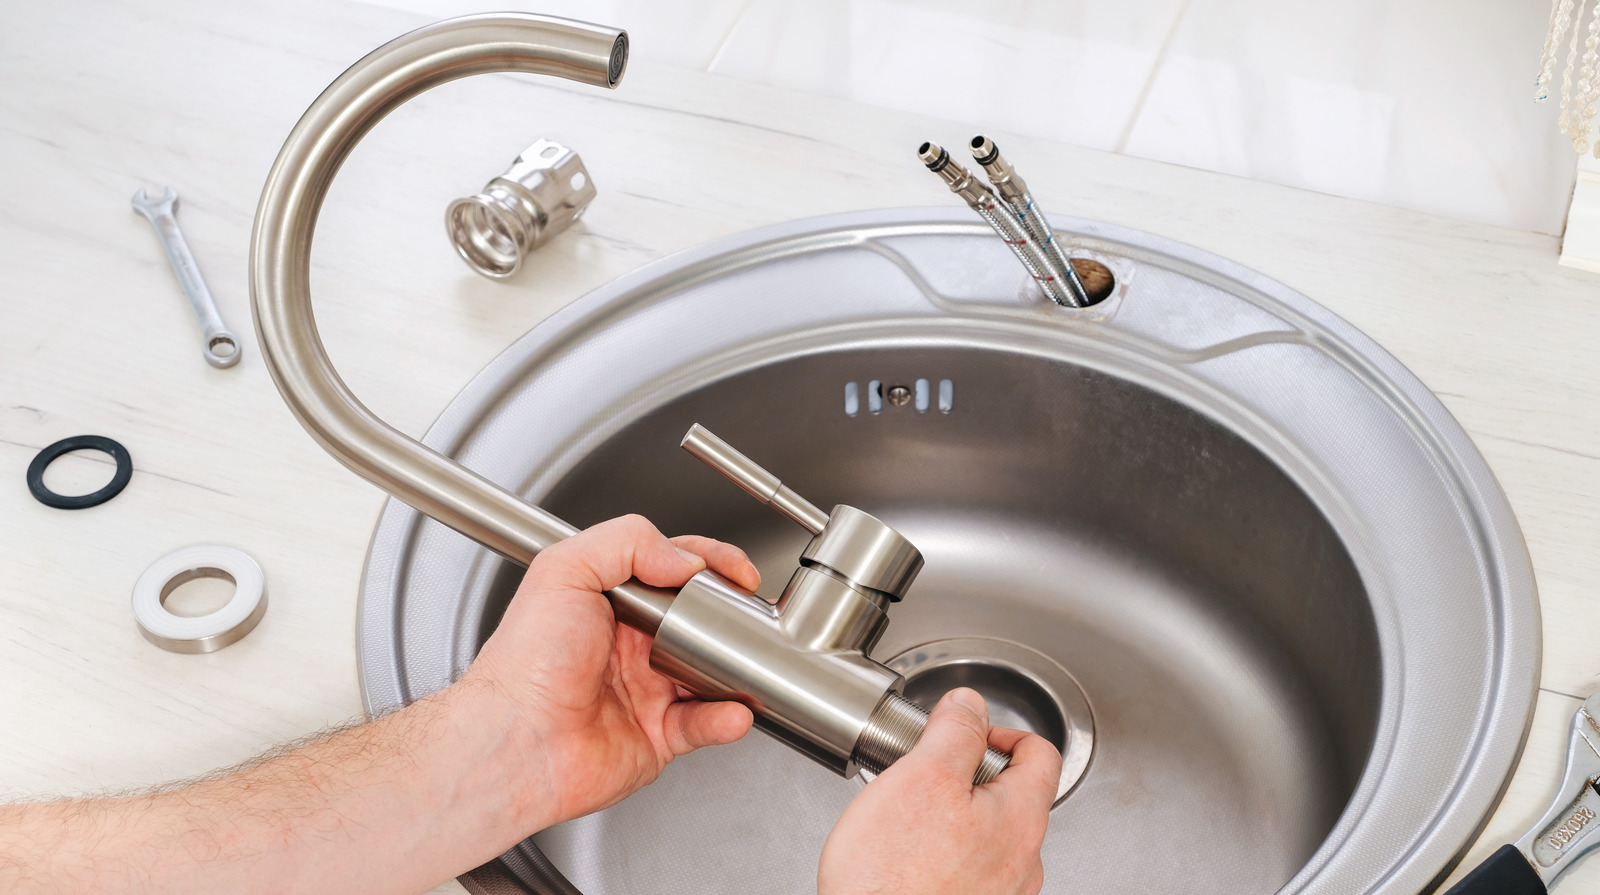 How Much Does It Cost To Install A Kitchen Faucet?